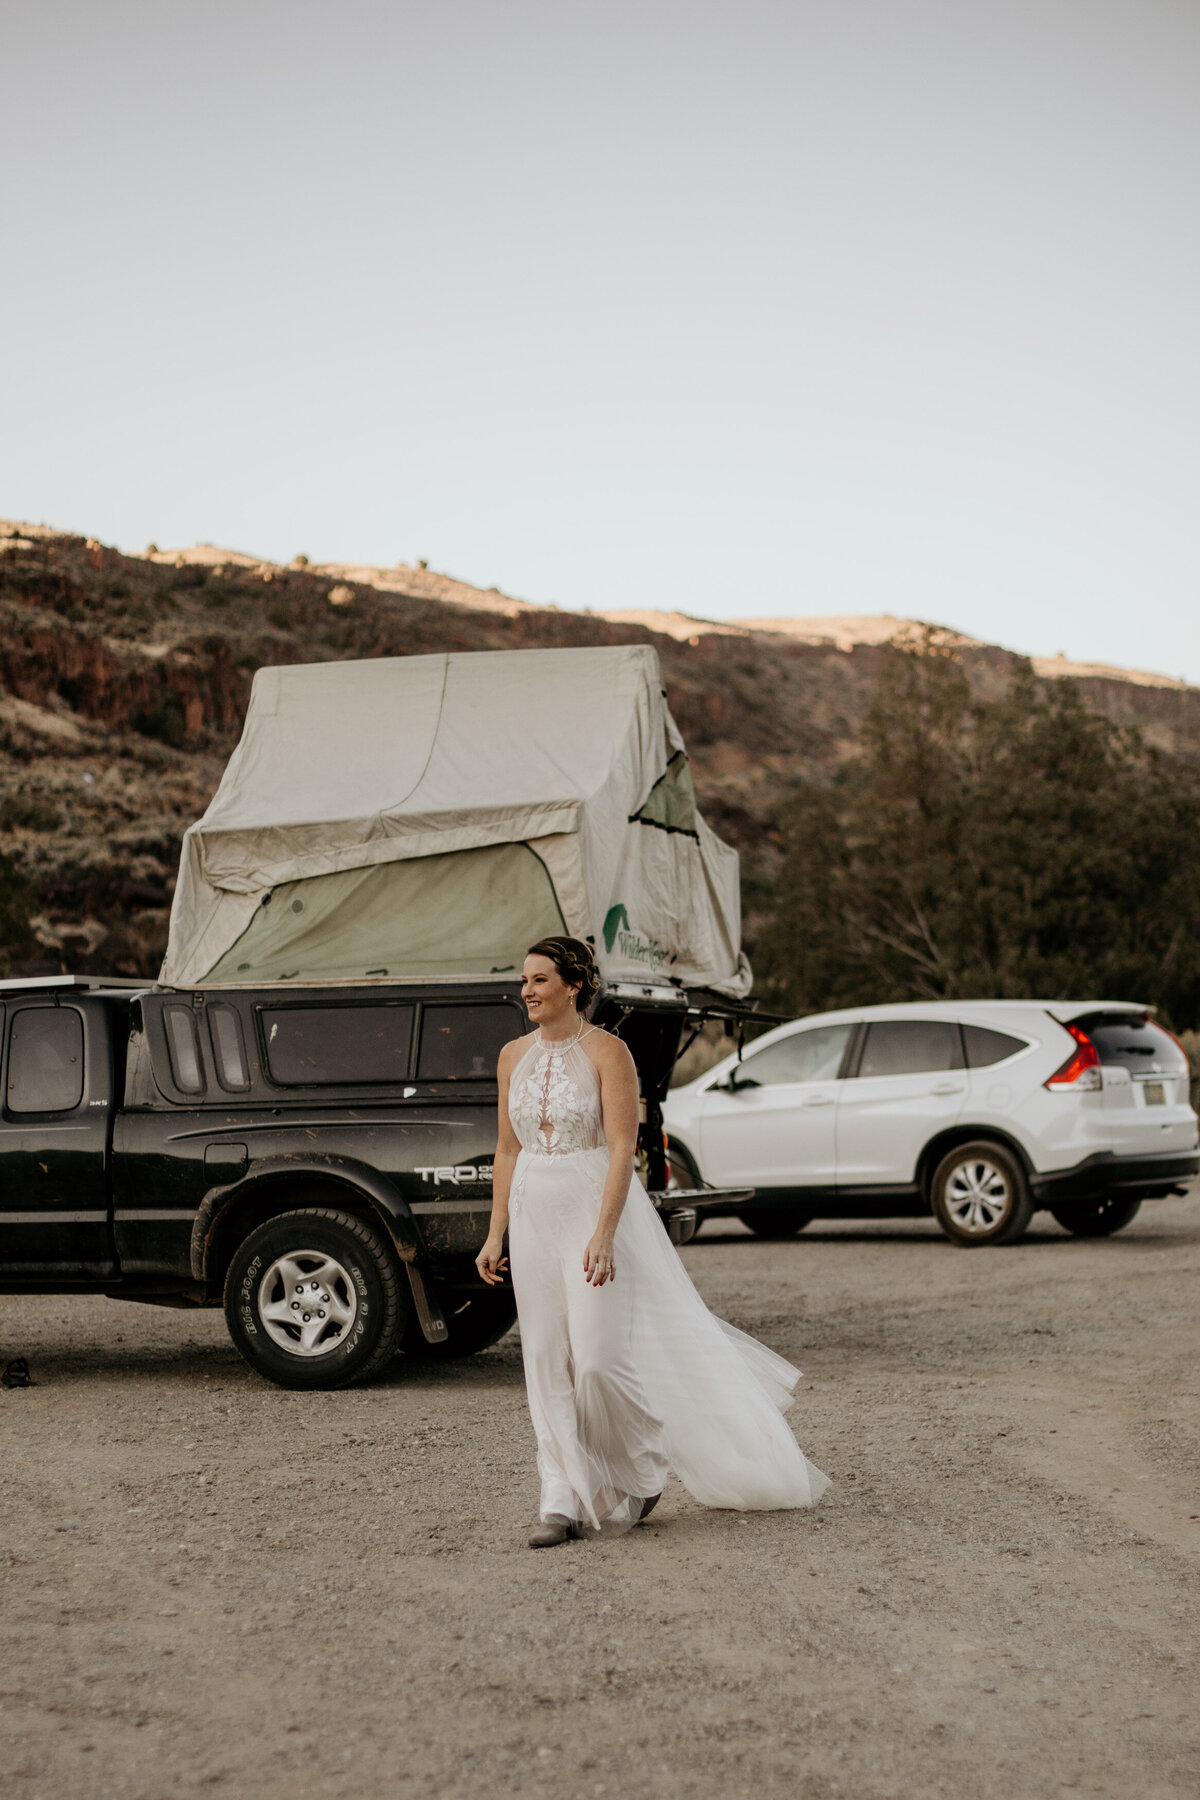 bride walking away from truck with tent on top